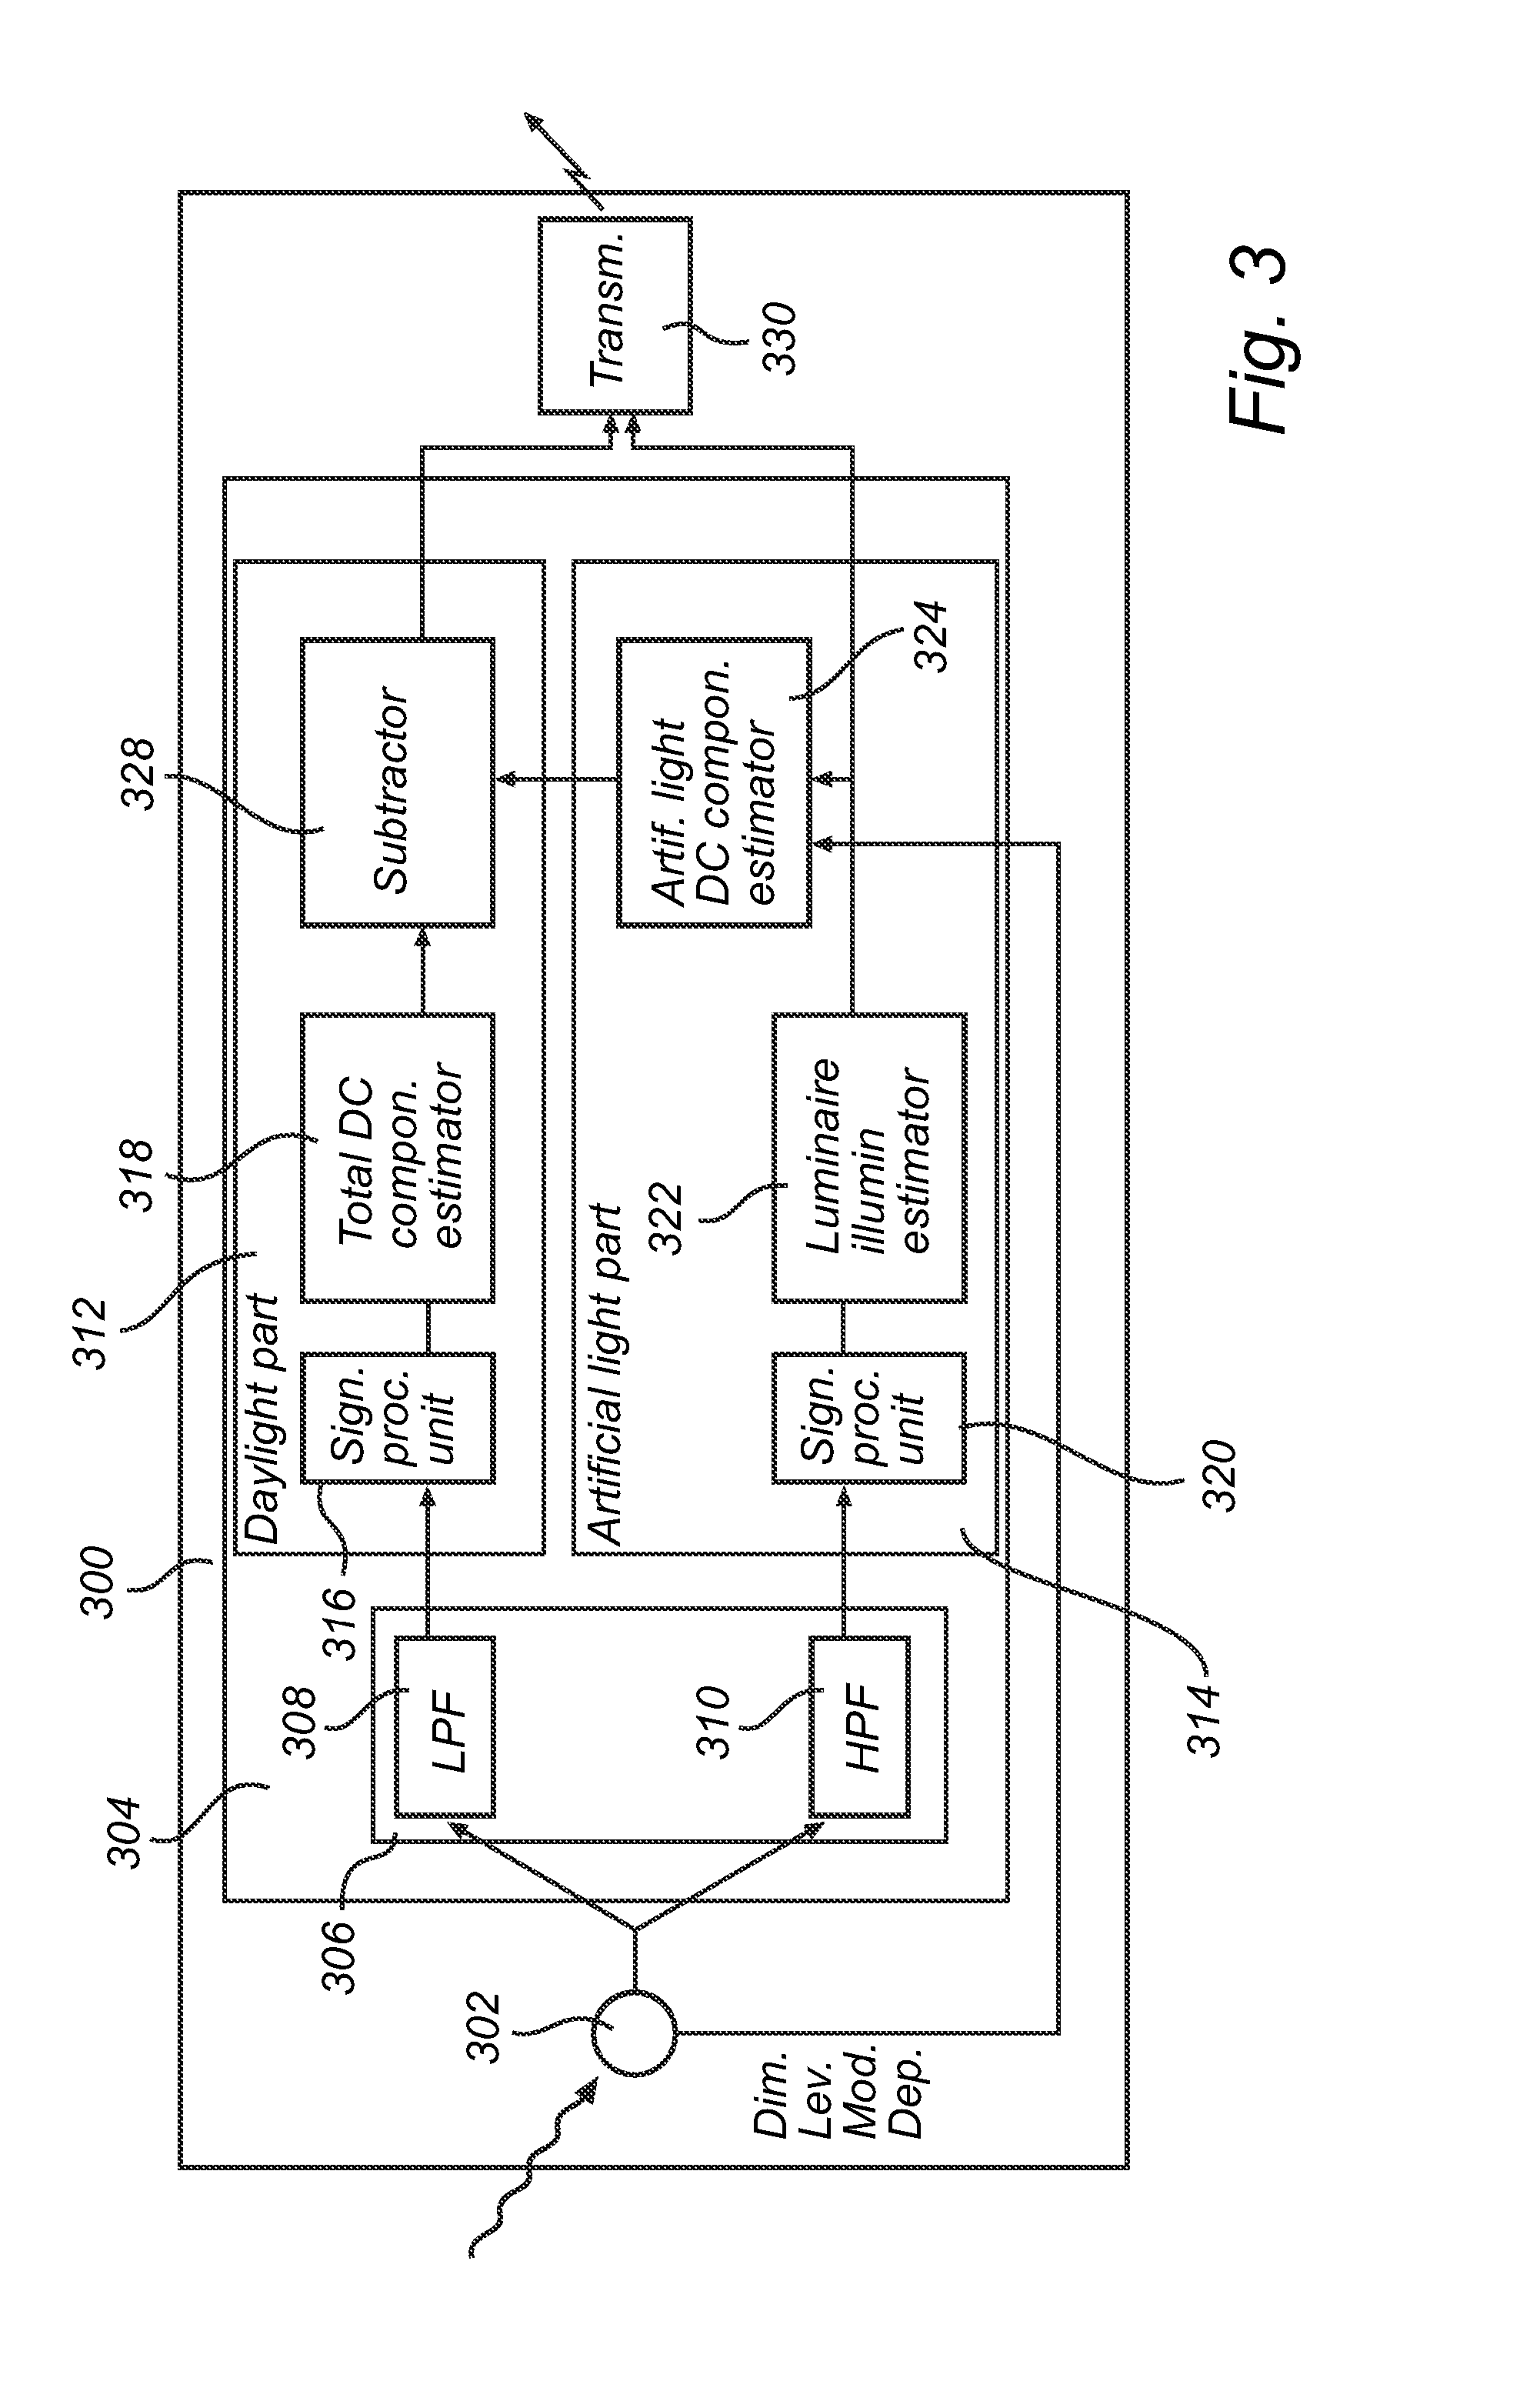 System and methods for daylight-integrated illumination control